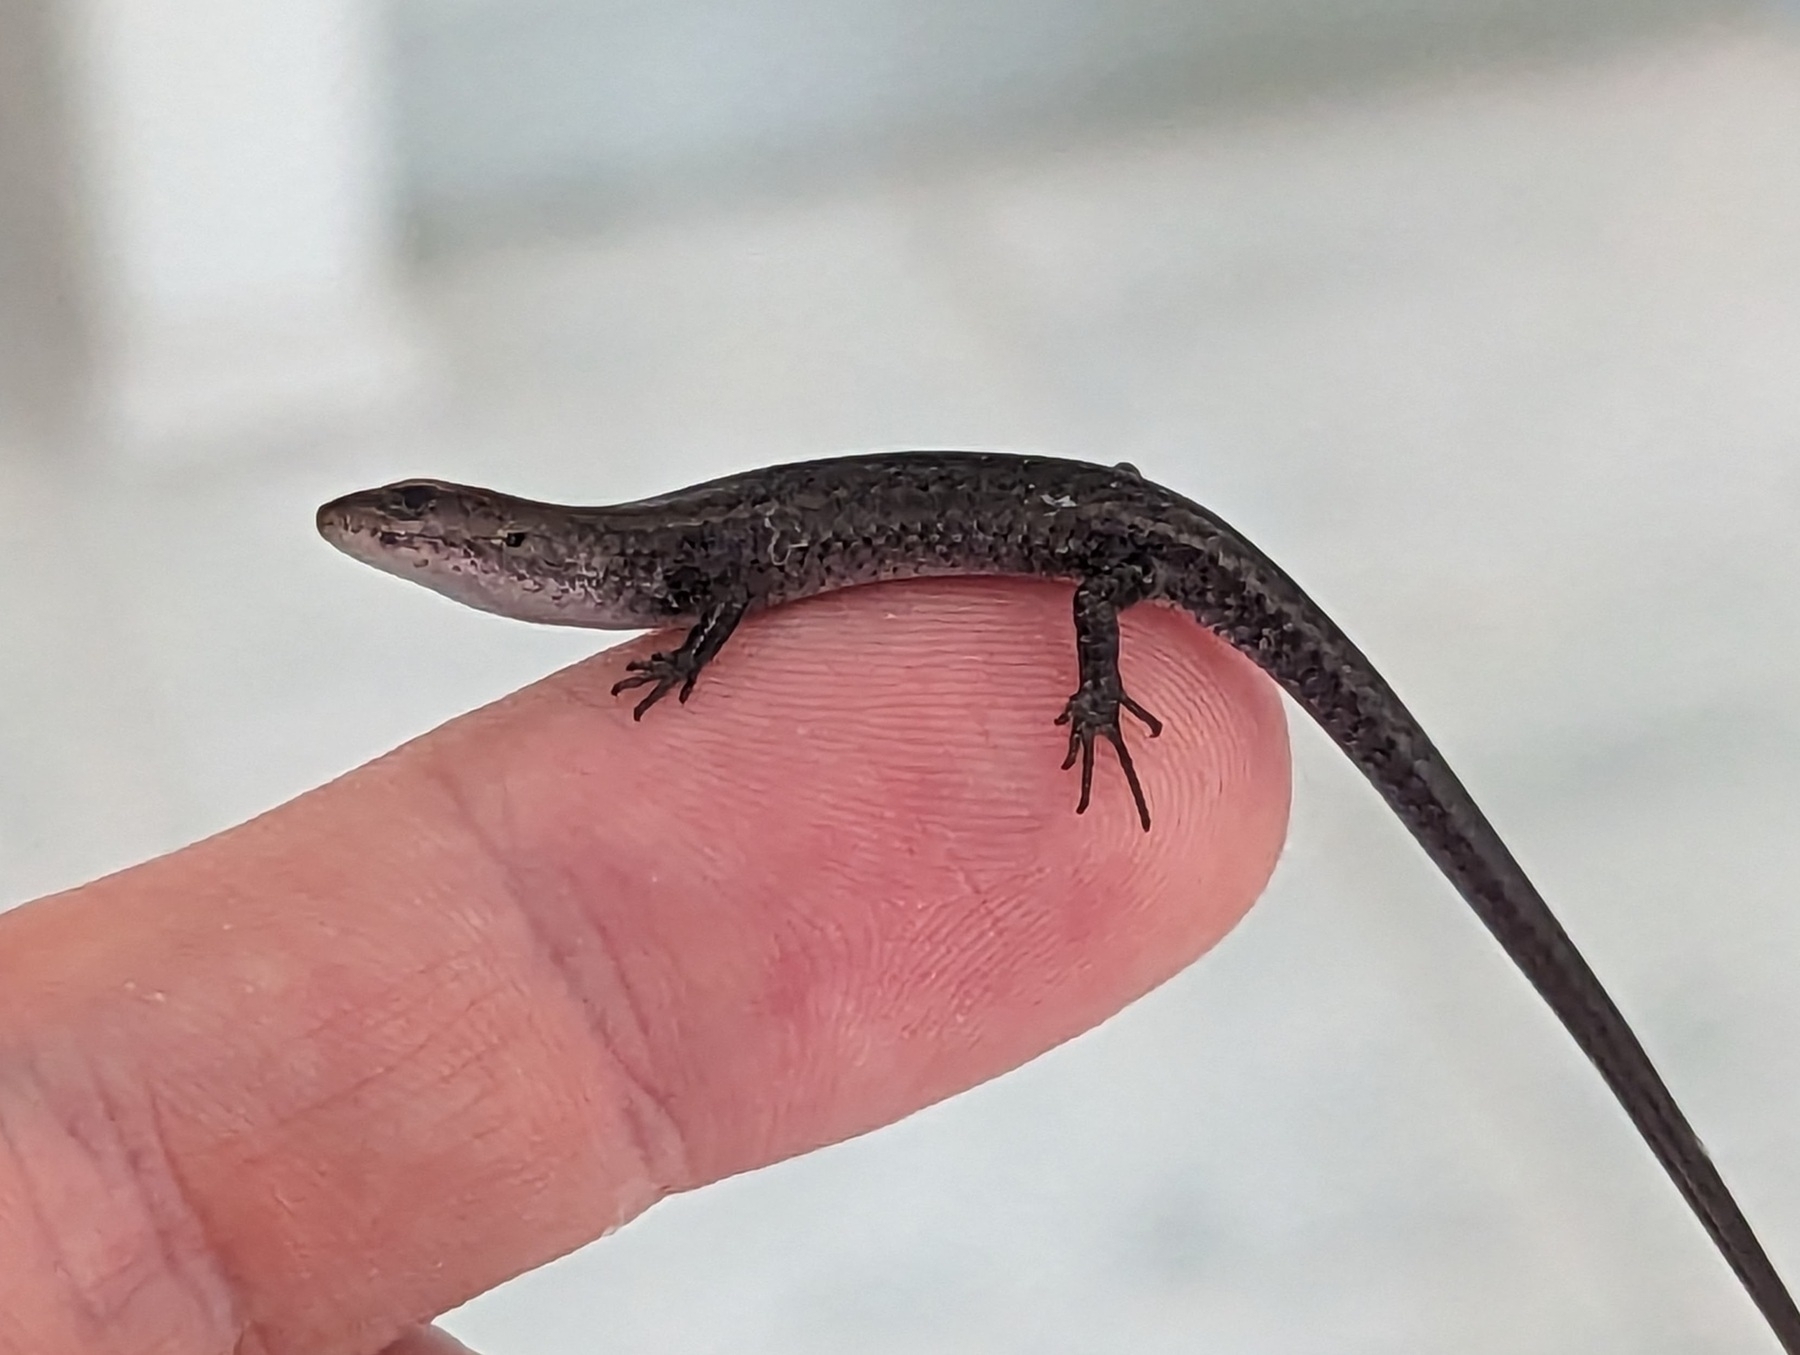 Close-up of the small lizard sitting on my finger